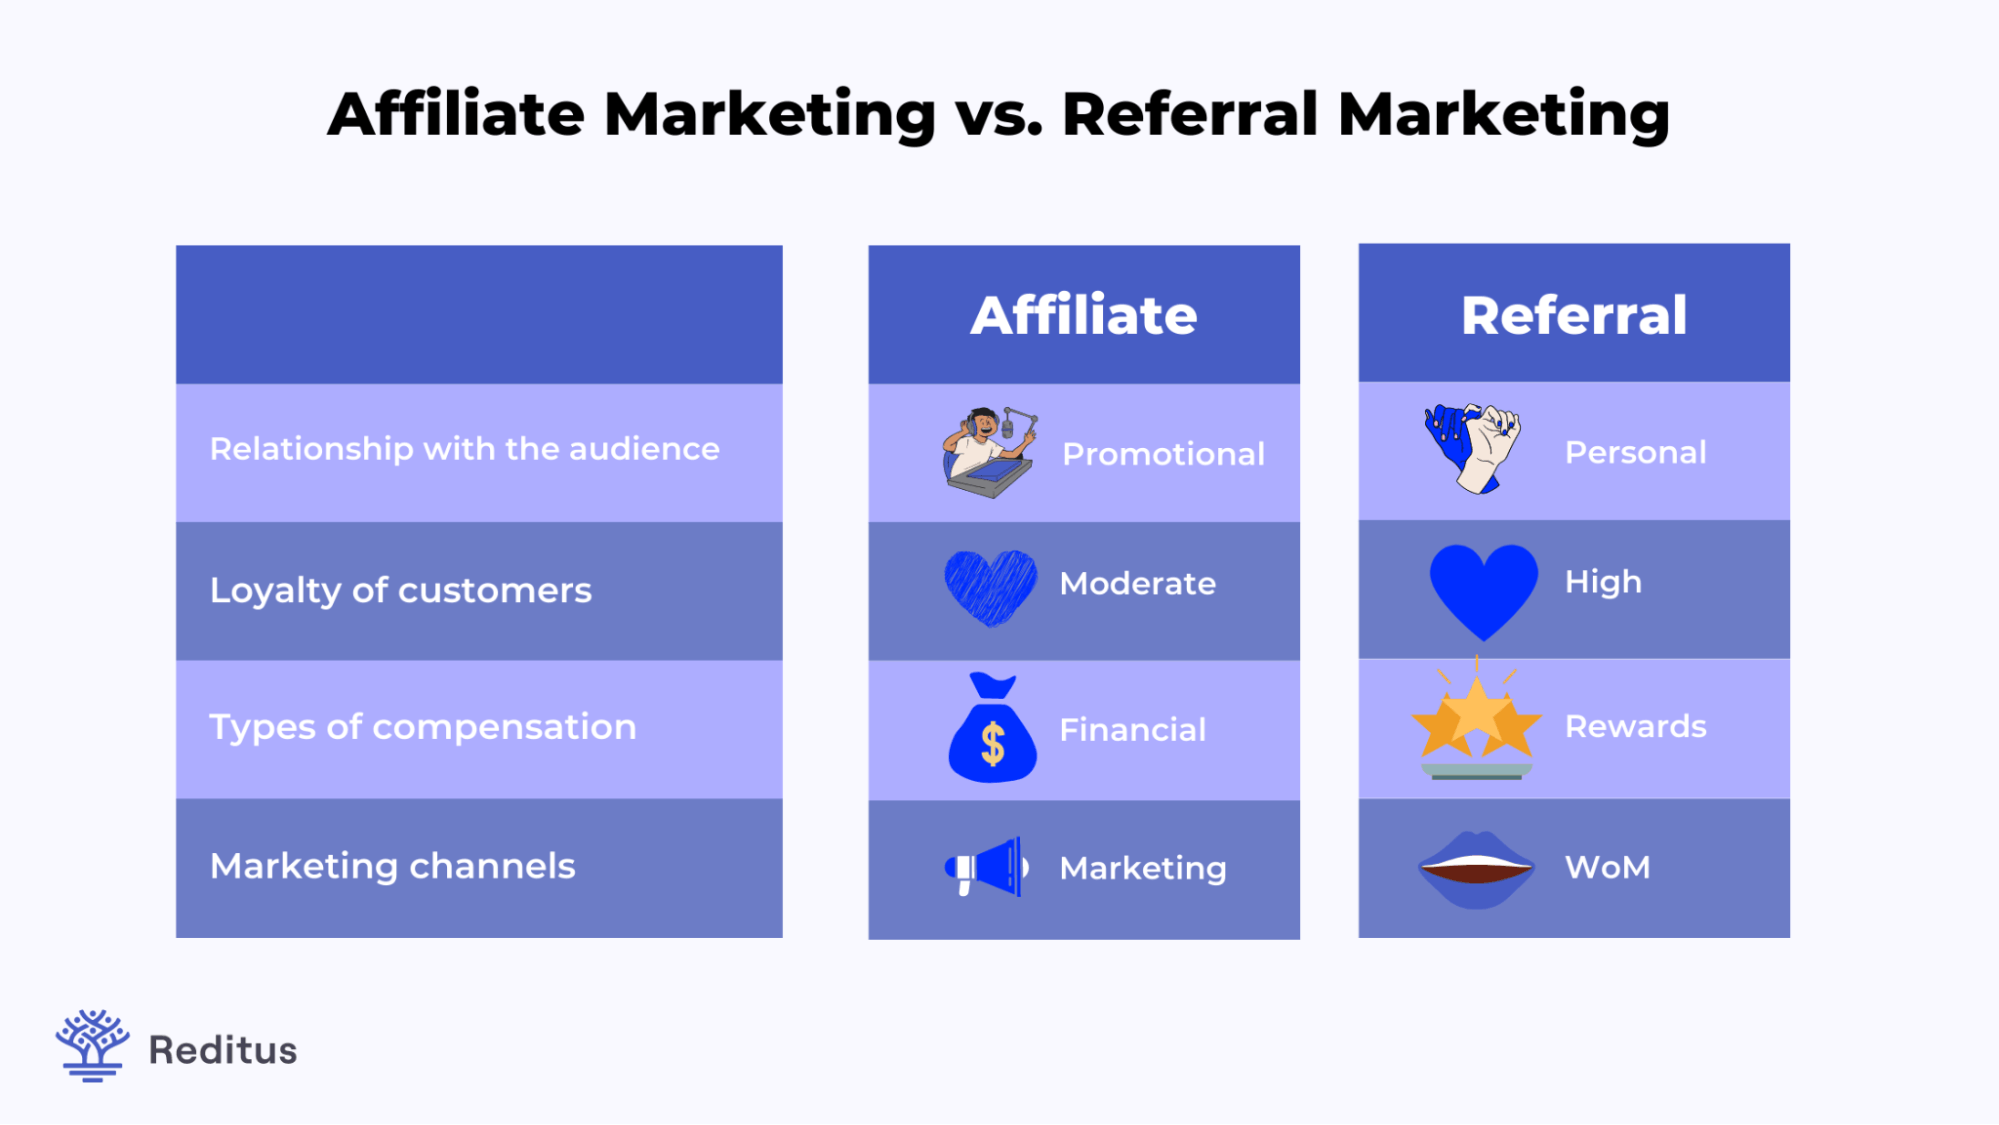 Comparison between affiliate marketing and referral marketing